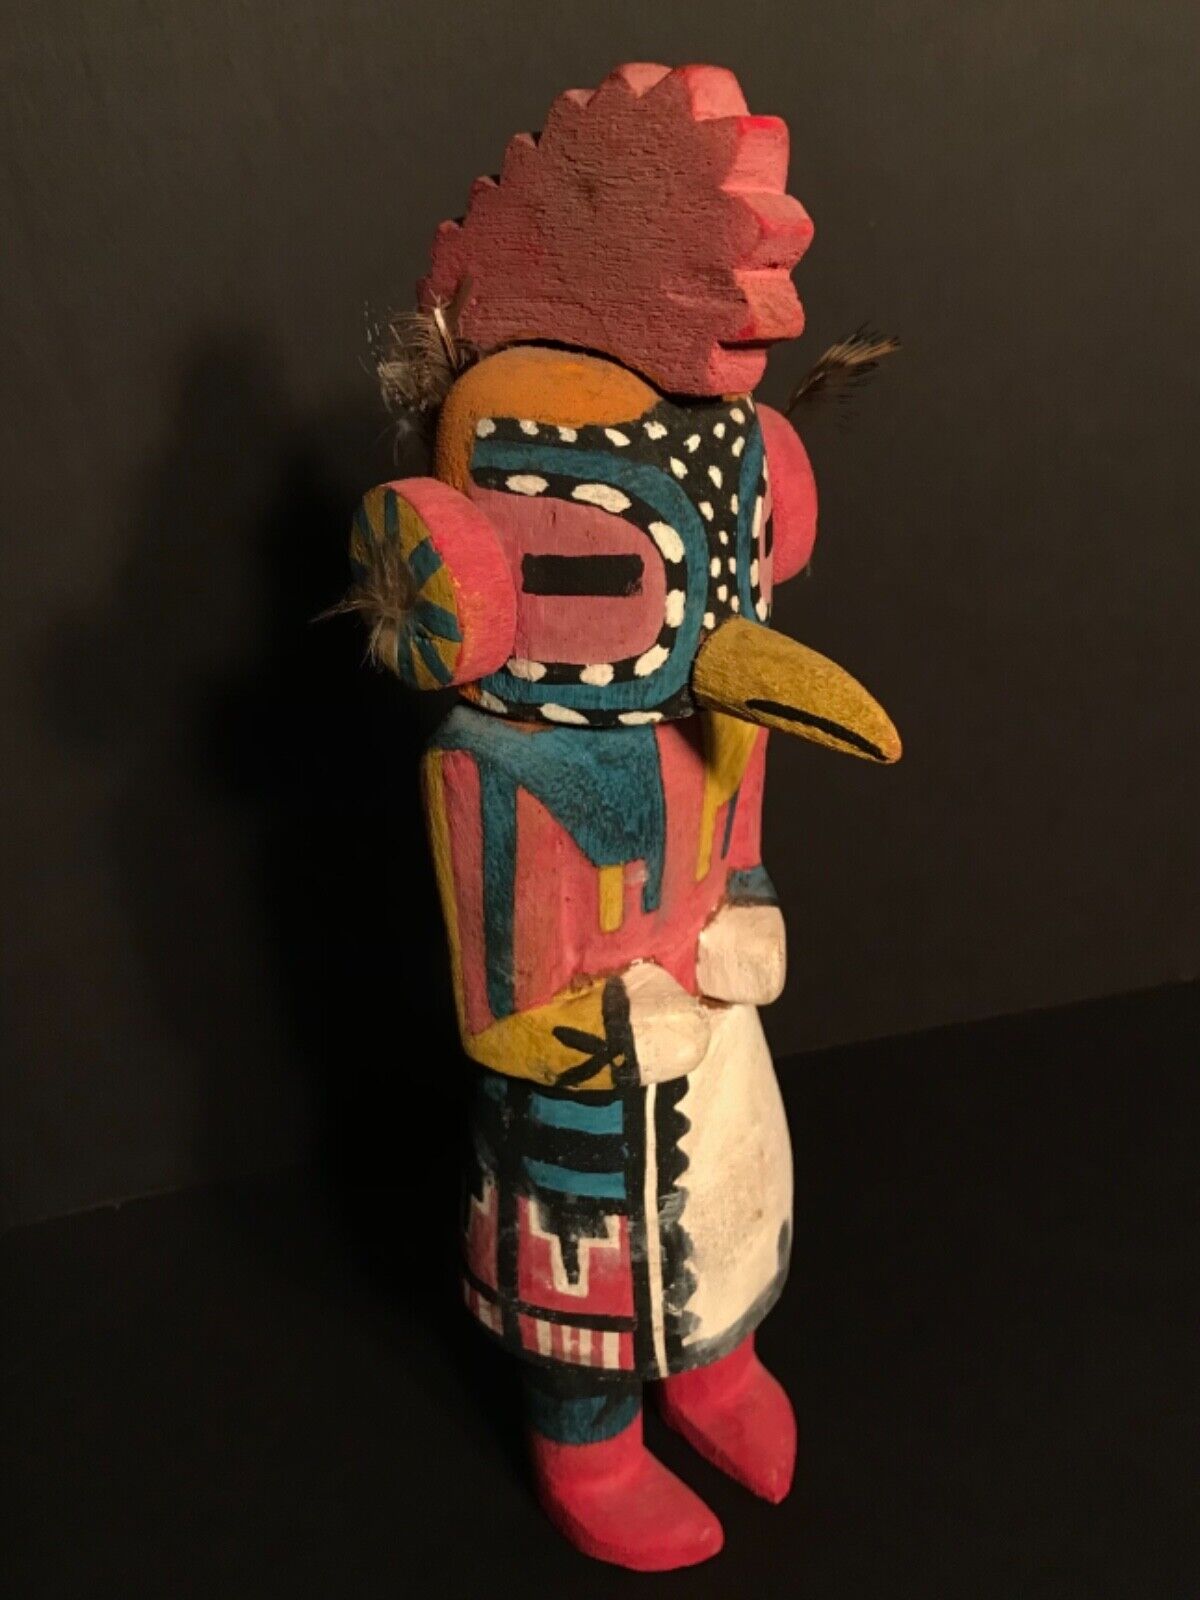  HOPI PUEBLO CARVED COTTONWOOD ROOT ROOSTER KACHINA DOLL, MID 20TH C, EXCELLENT